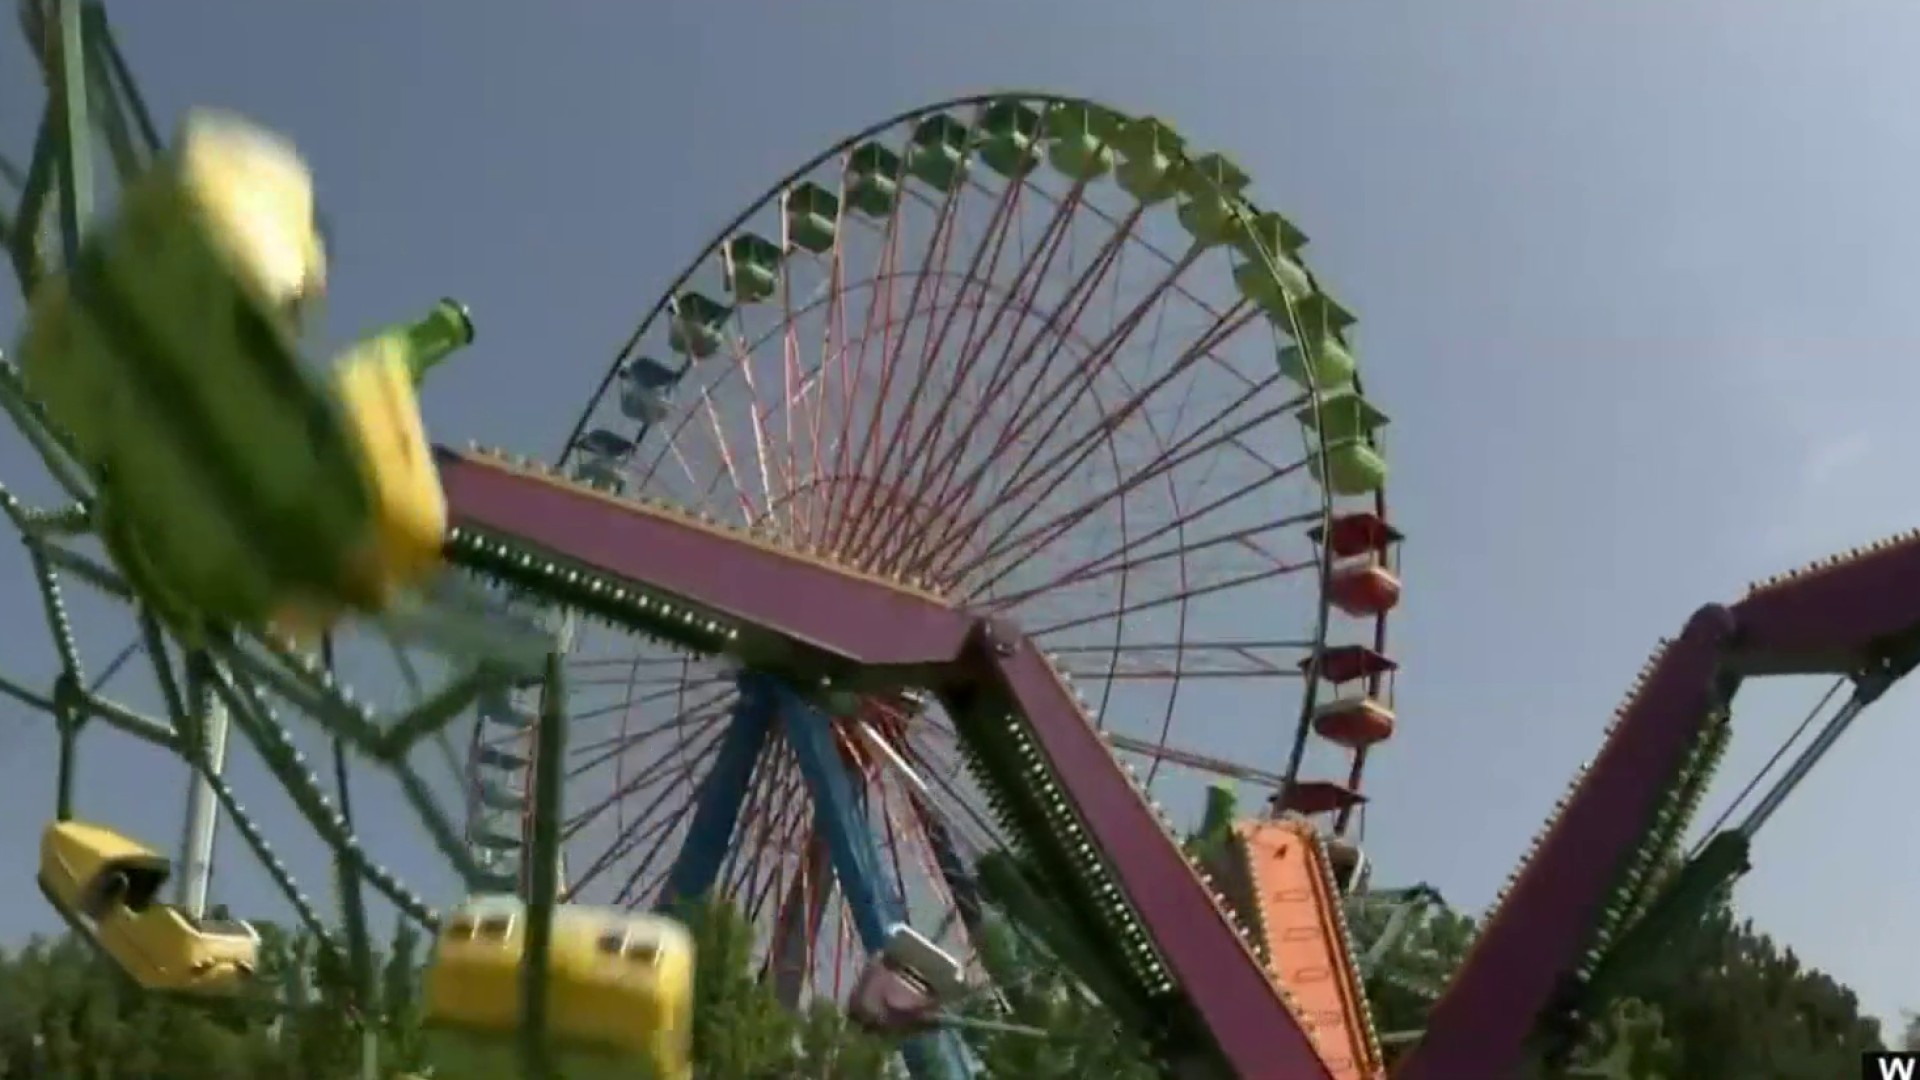 Couple accused of having sex in front of kids while riding ferris wheel at Cedar Point in Ohio